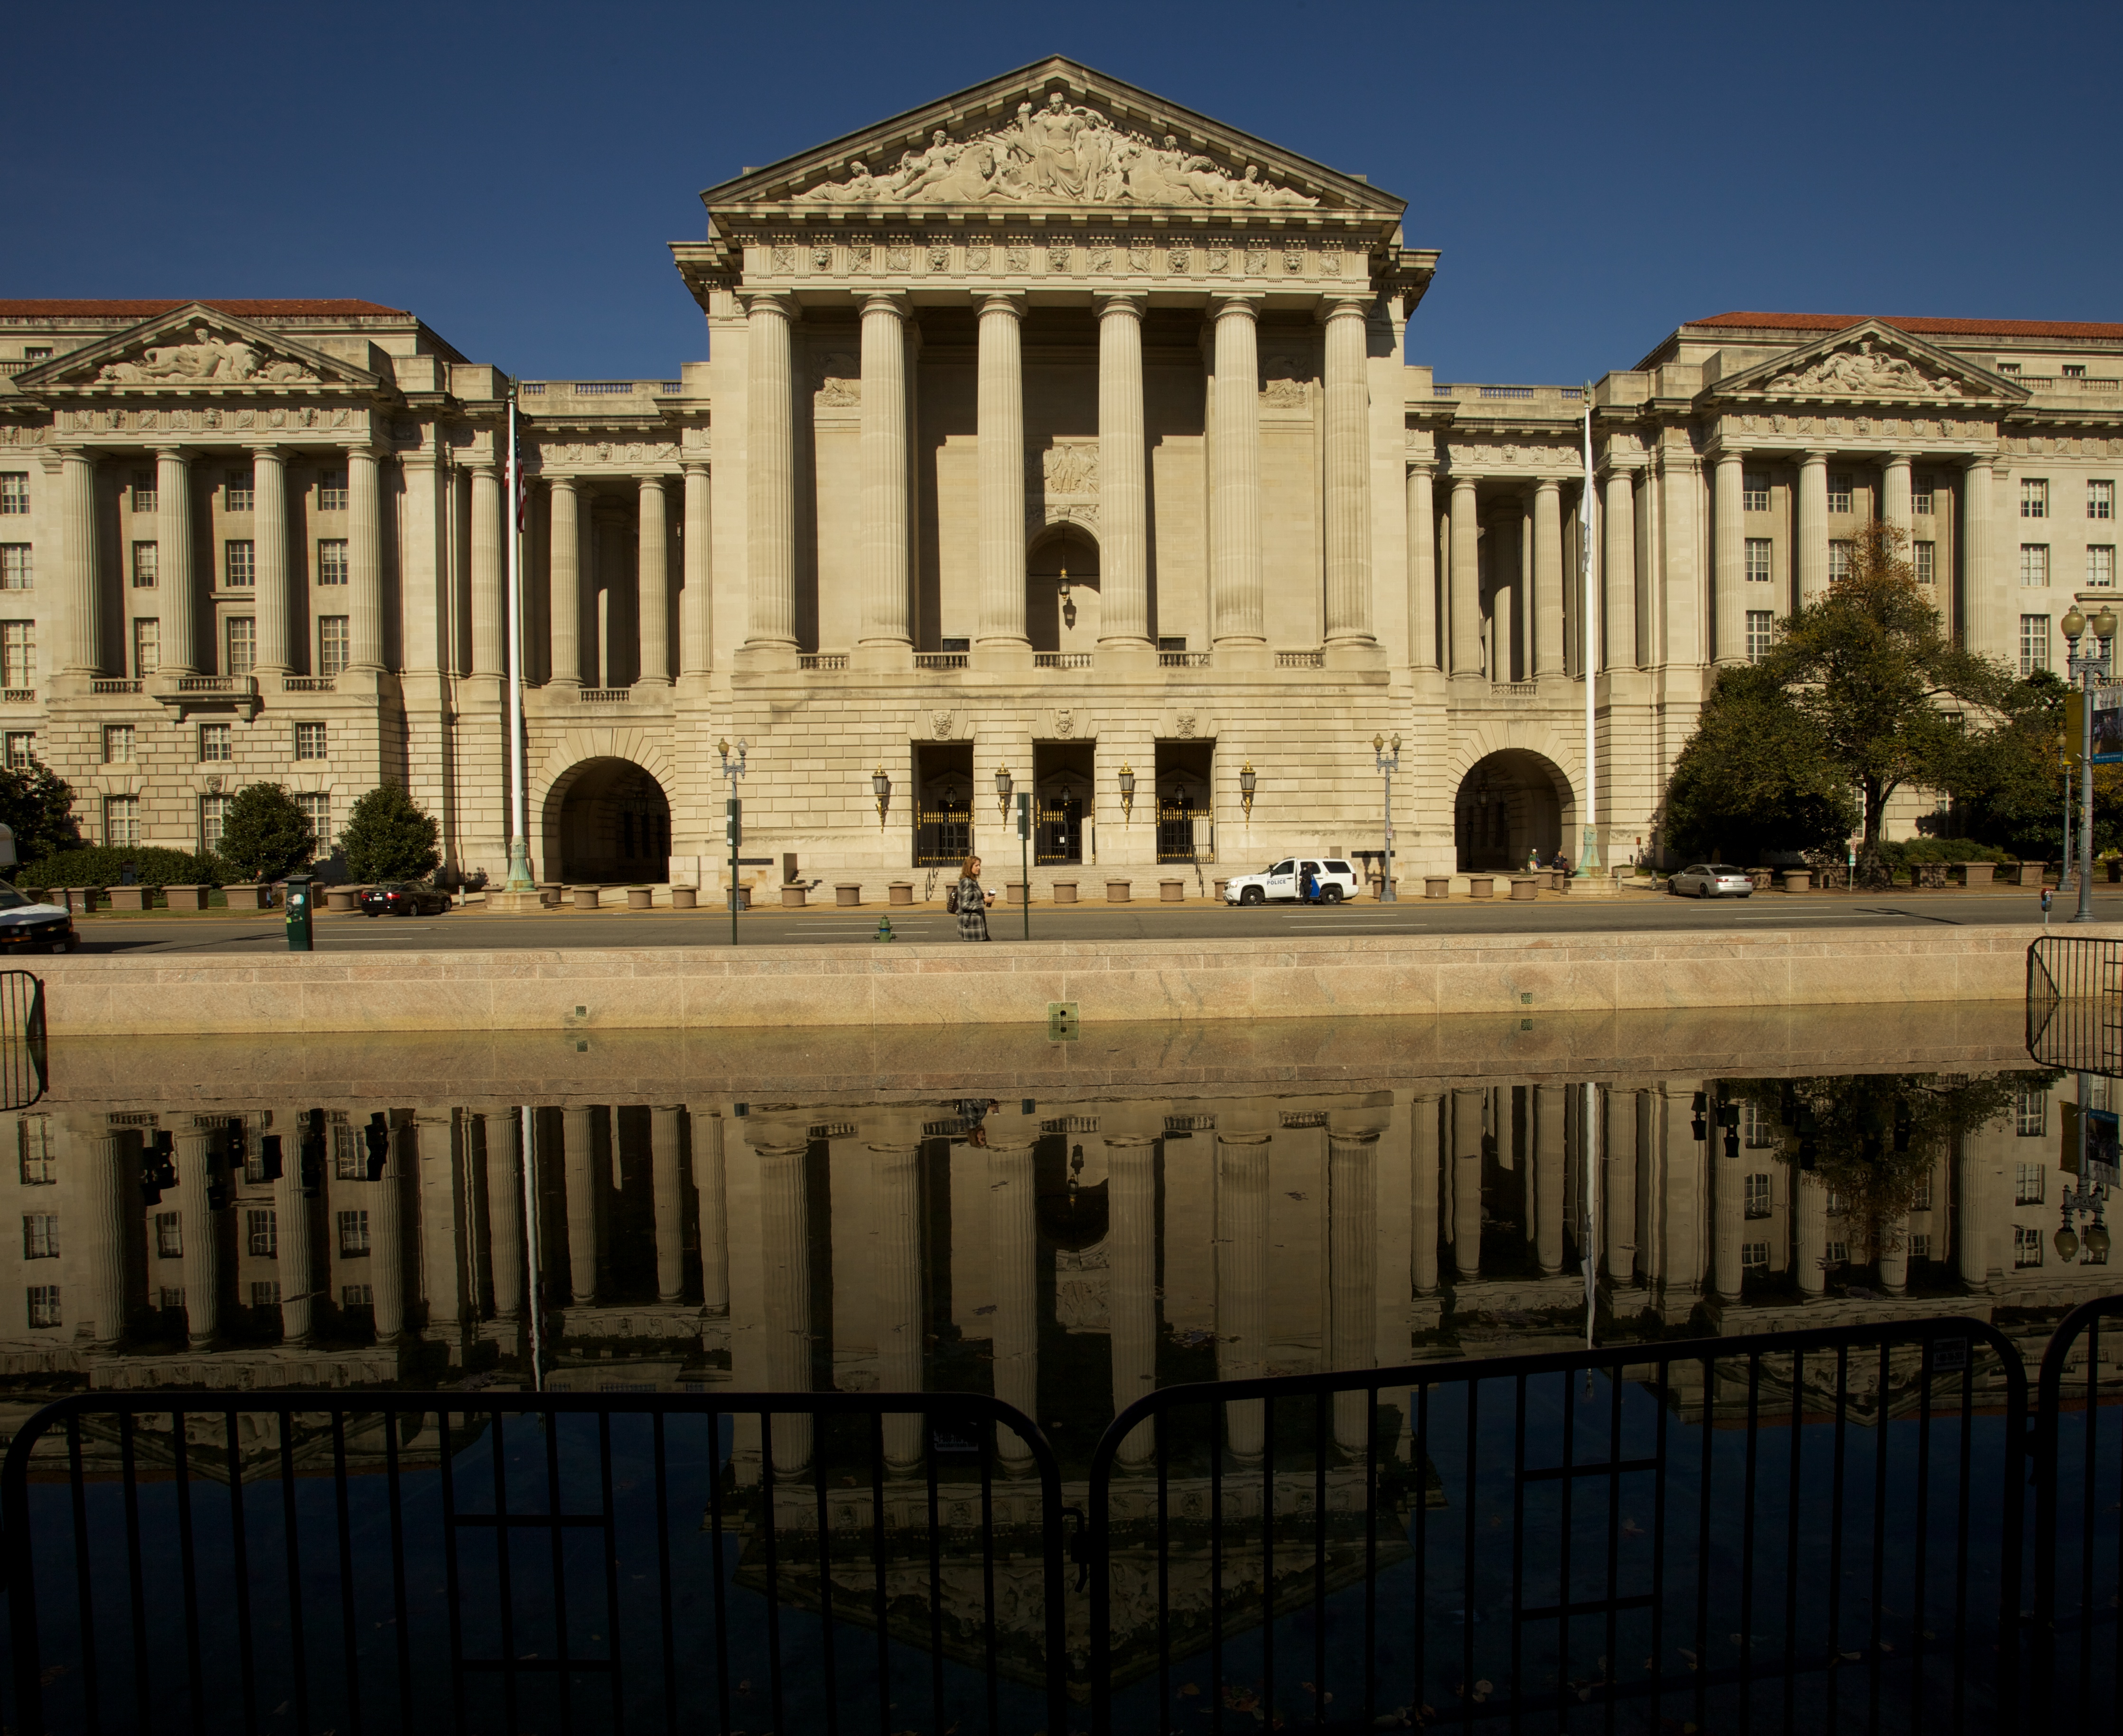 20th century classical revival architecture | Architecture,Photography, History, and ...